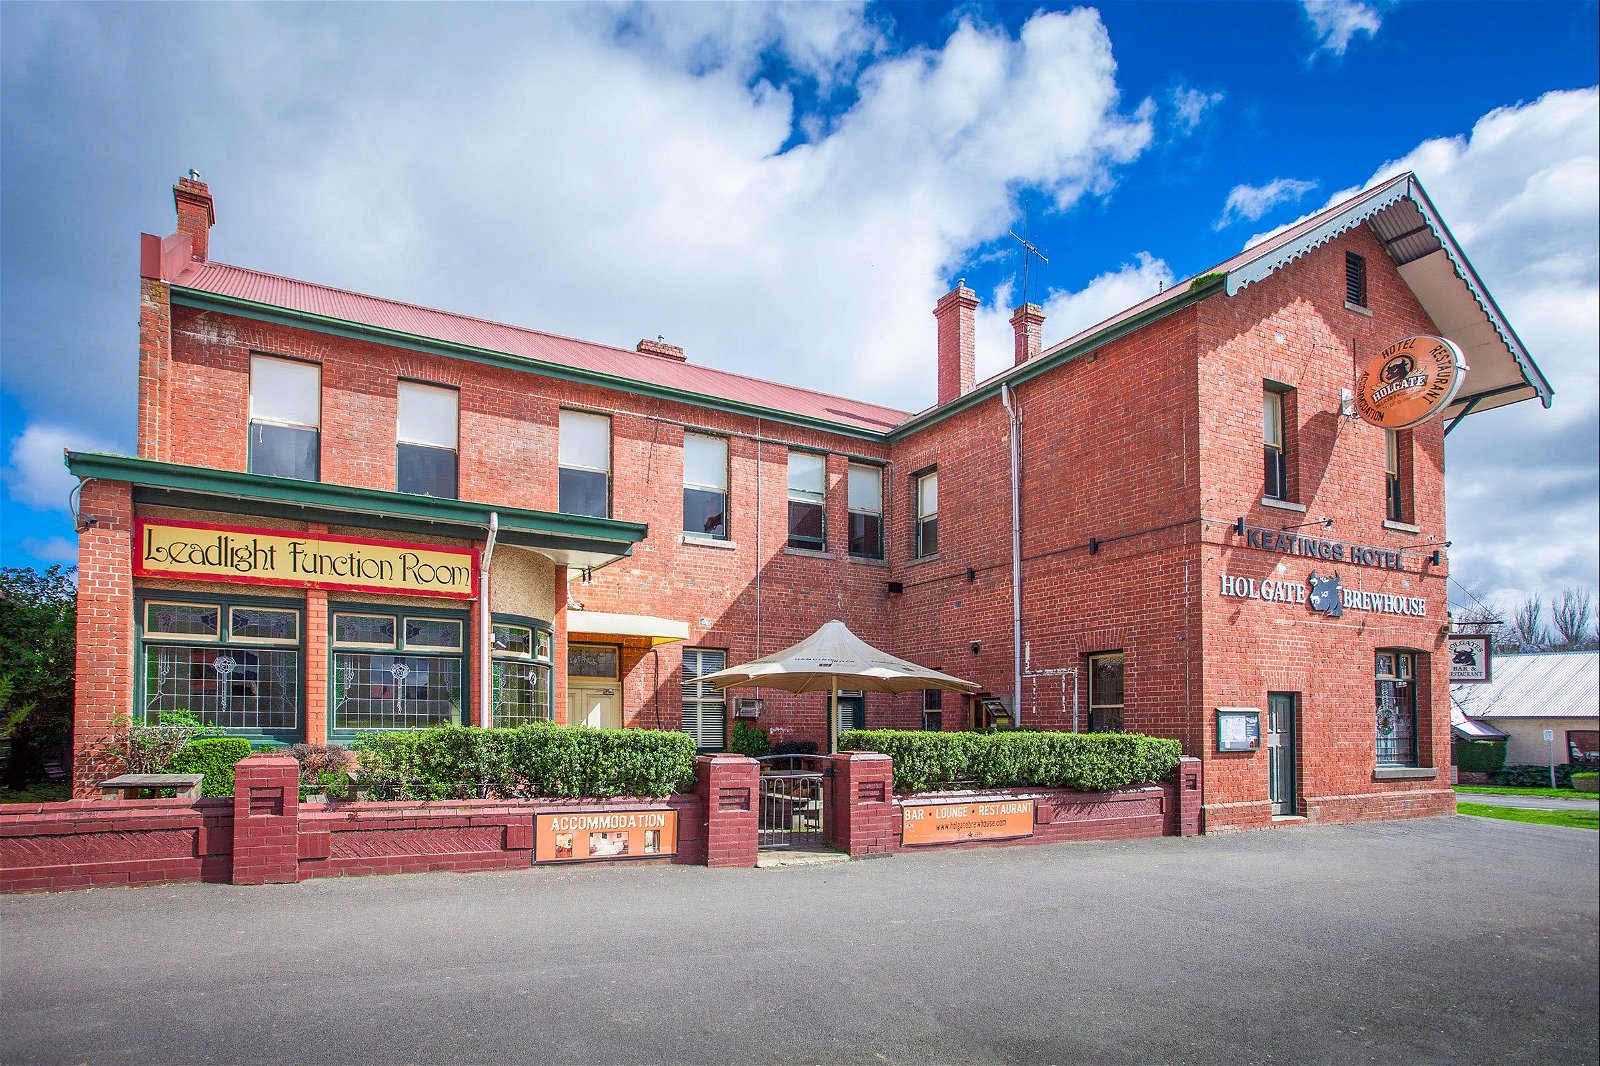 Holgate Brewhouse - Accommodation Find 1